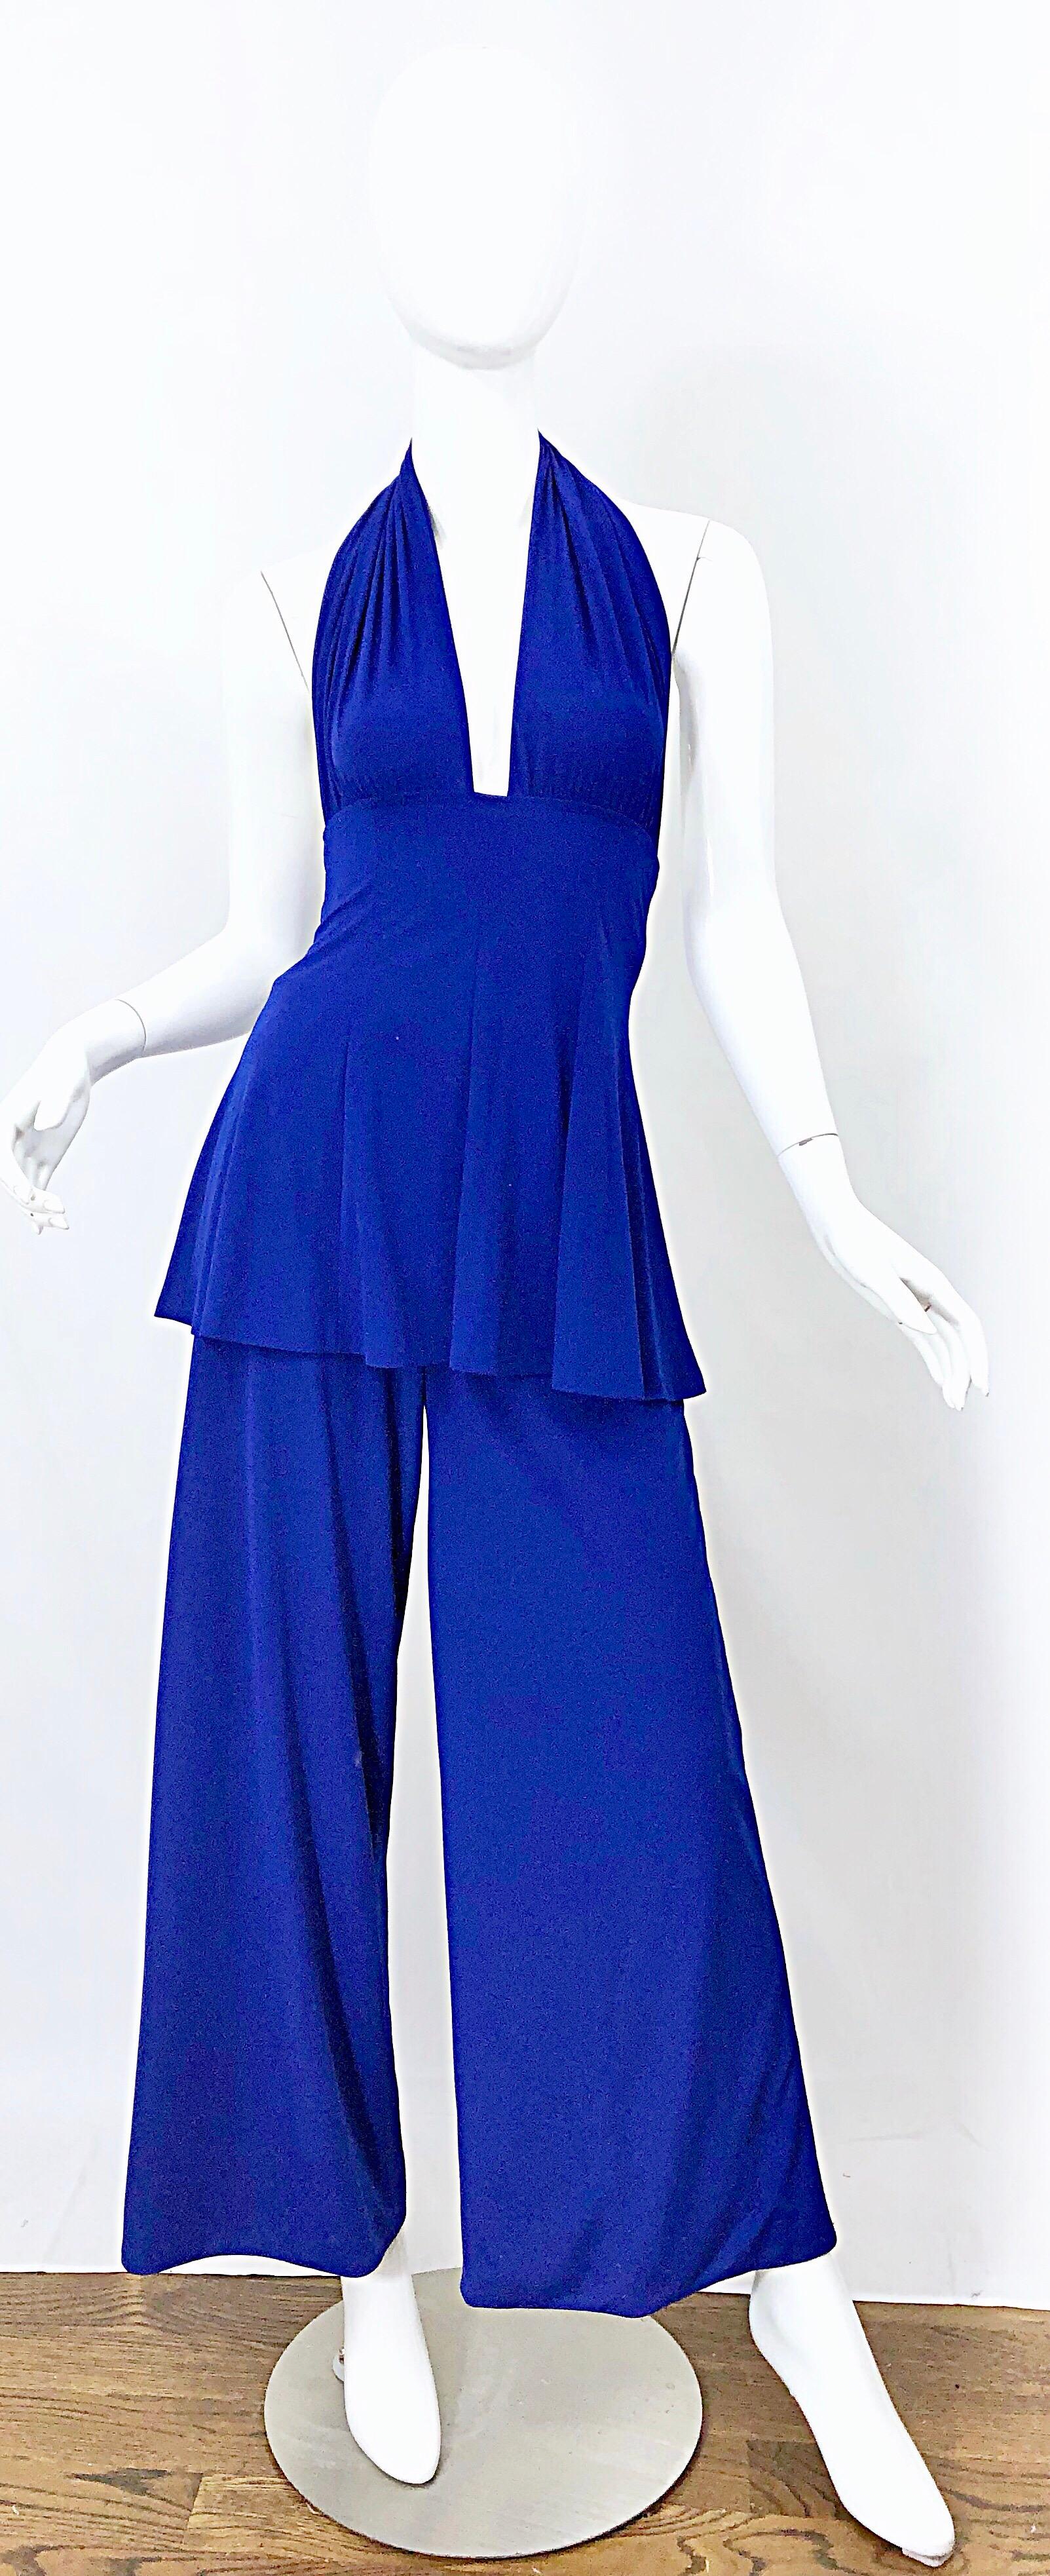 Rare vintage late 70s NORMA KAMALI OMO bright royal blue one piece plunging swimsuit / bodysuit and wide leg trosuers! Kamali is high credible with not only her design, but her practicality as well. This unique ensemble is a pure example of the